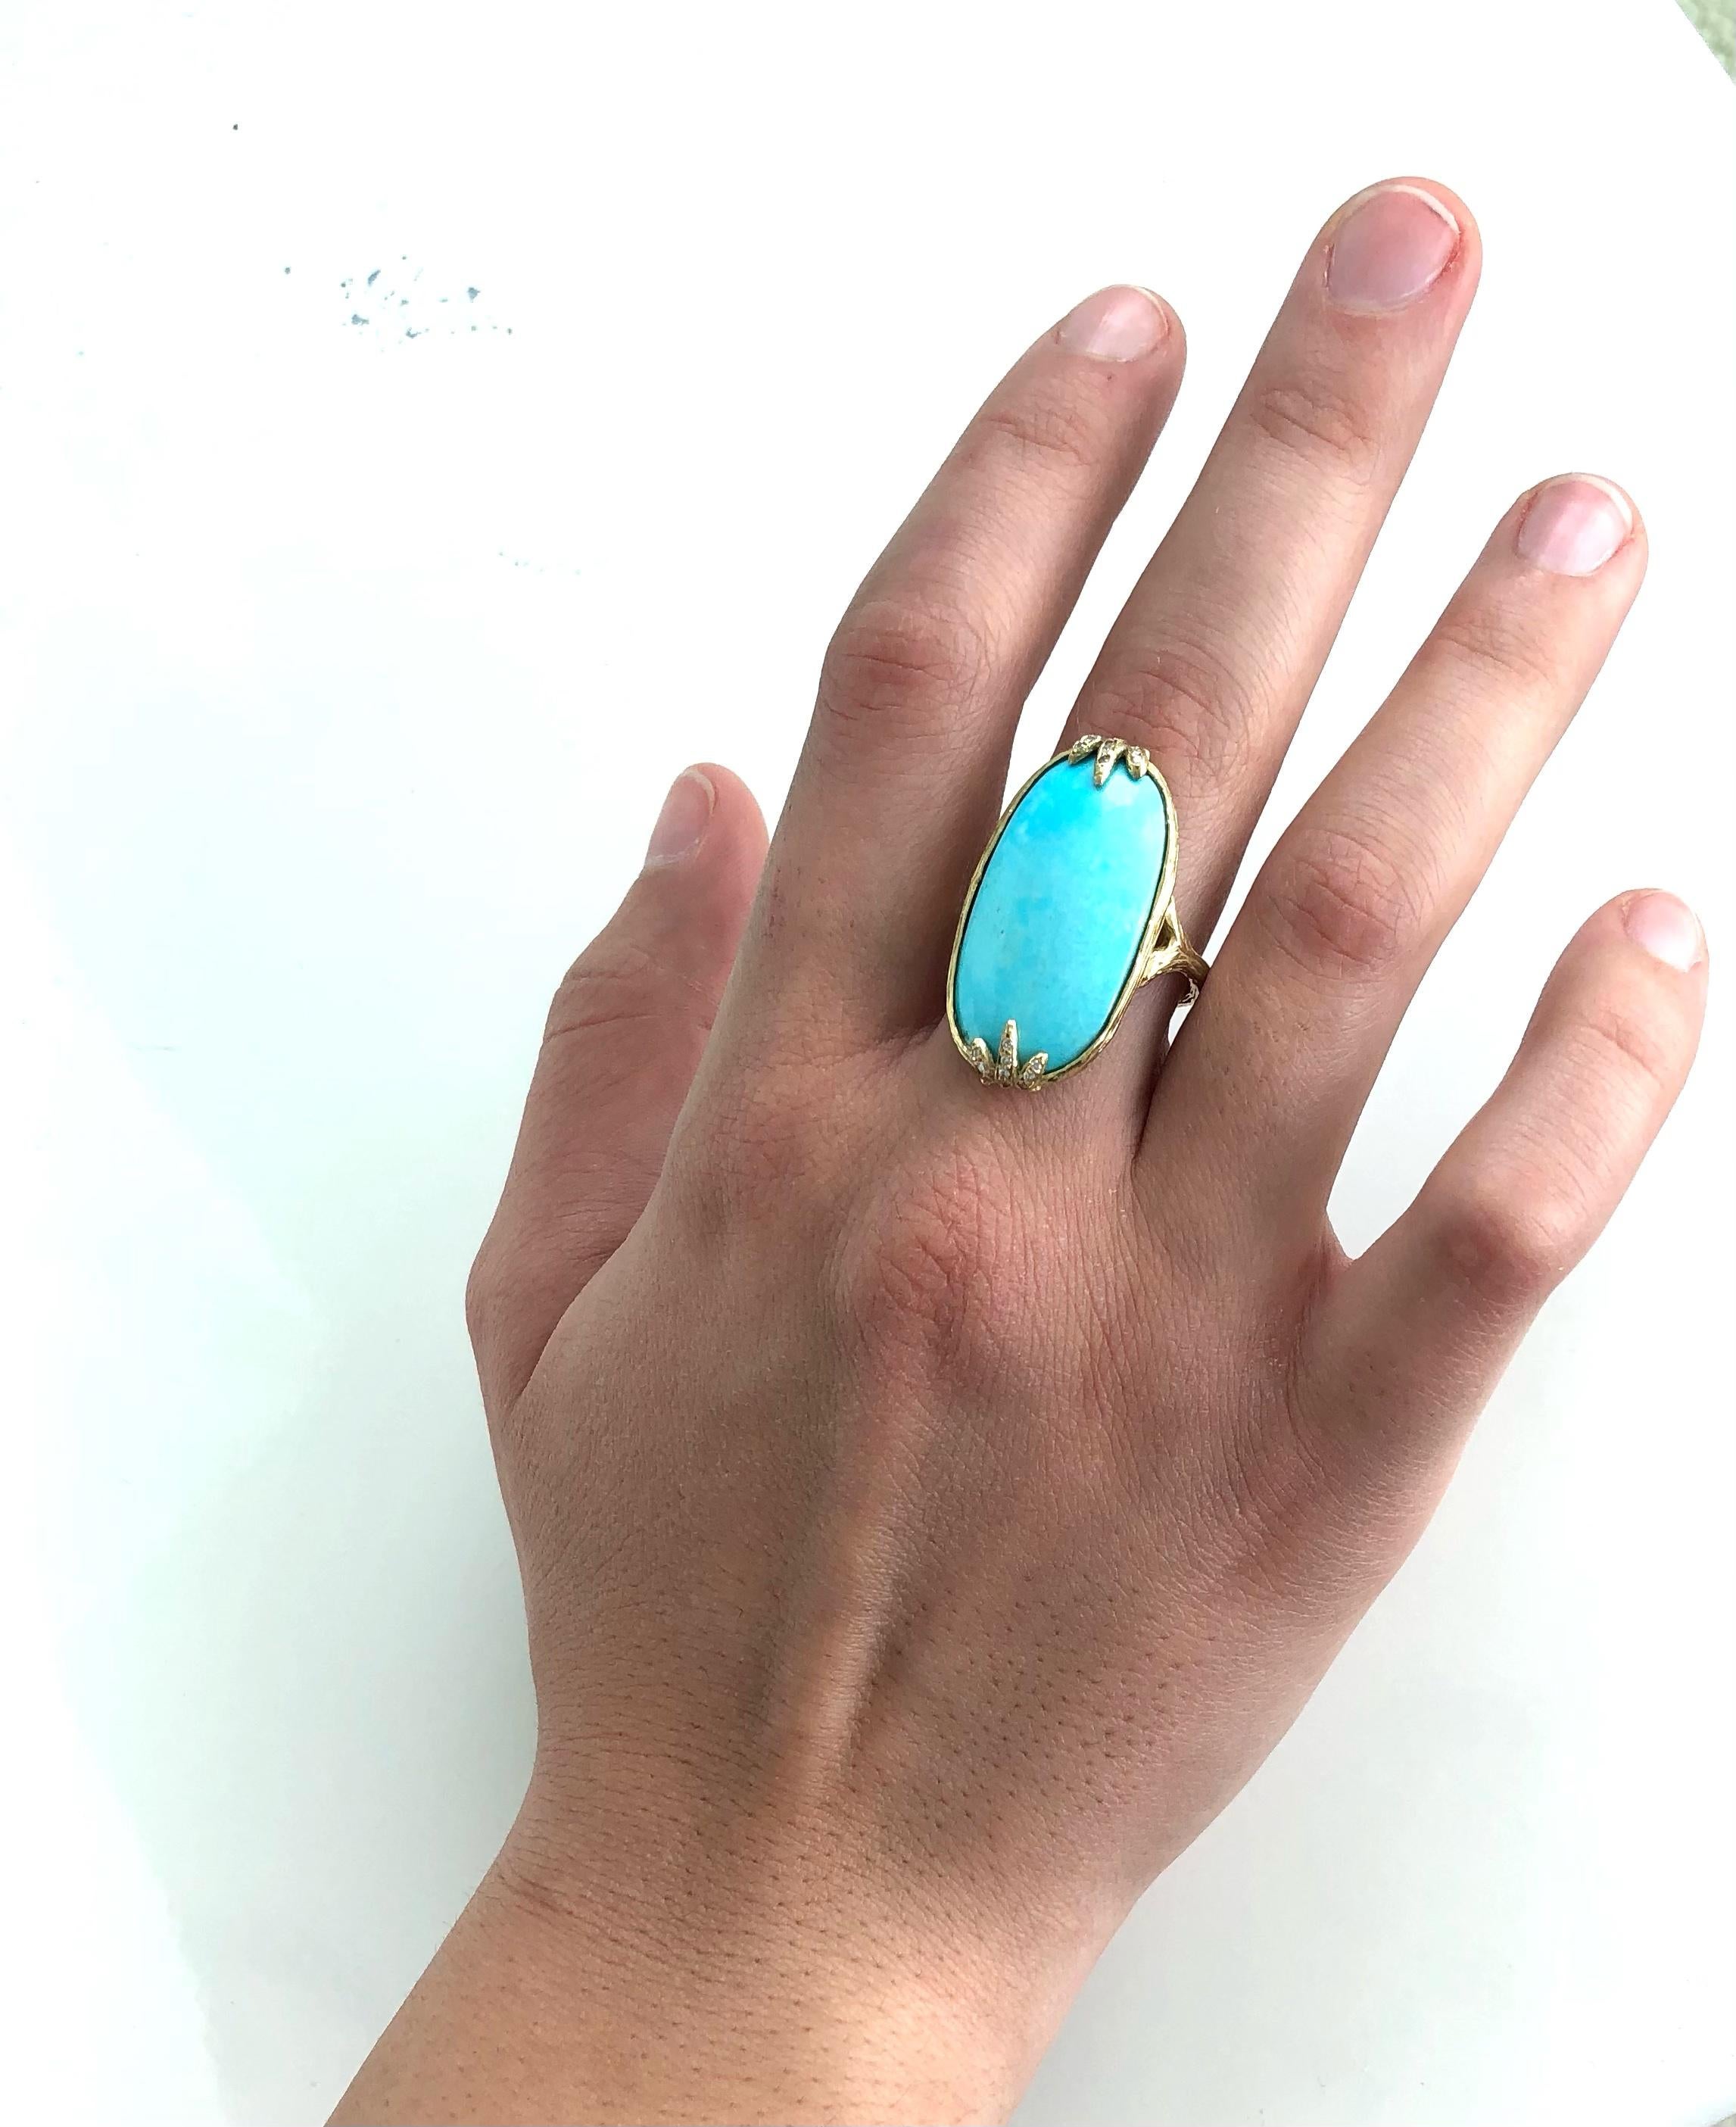 Smooth sky blue Persian Turquoise is the inspiration for this creation. The stone is juxtaposed by the twig textured gold and hints of diamond sparkle. This ring transitions easily from day to night!

GSRPTqDia — oval Persian Turquoise diamond